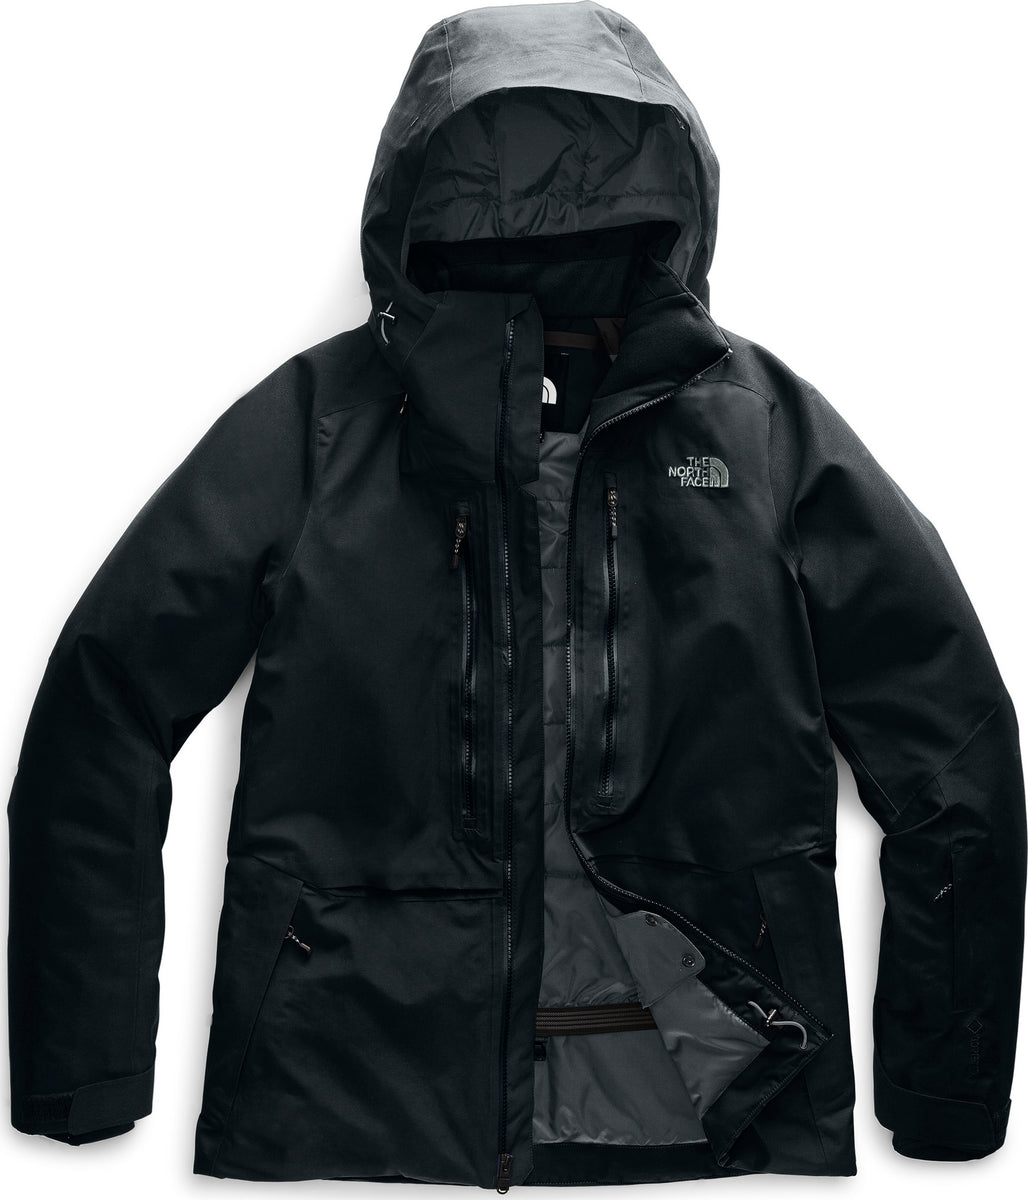 The North Face Powder Guide Jacket - Men's | Altitude Sports